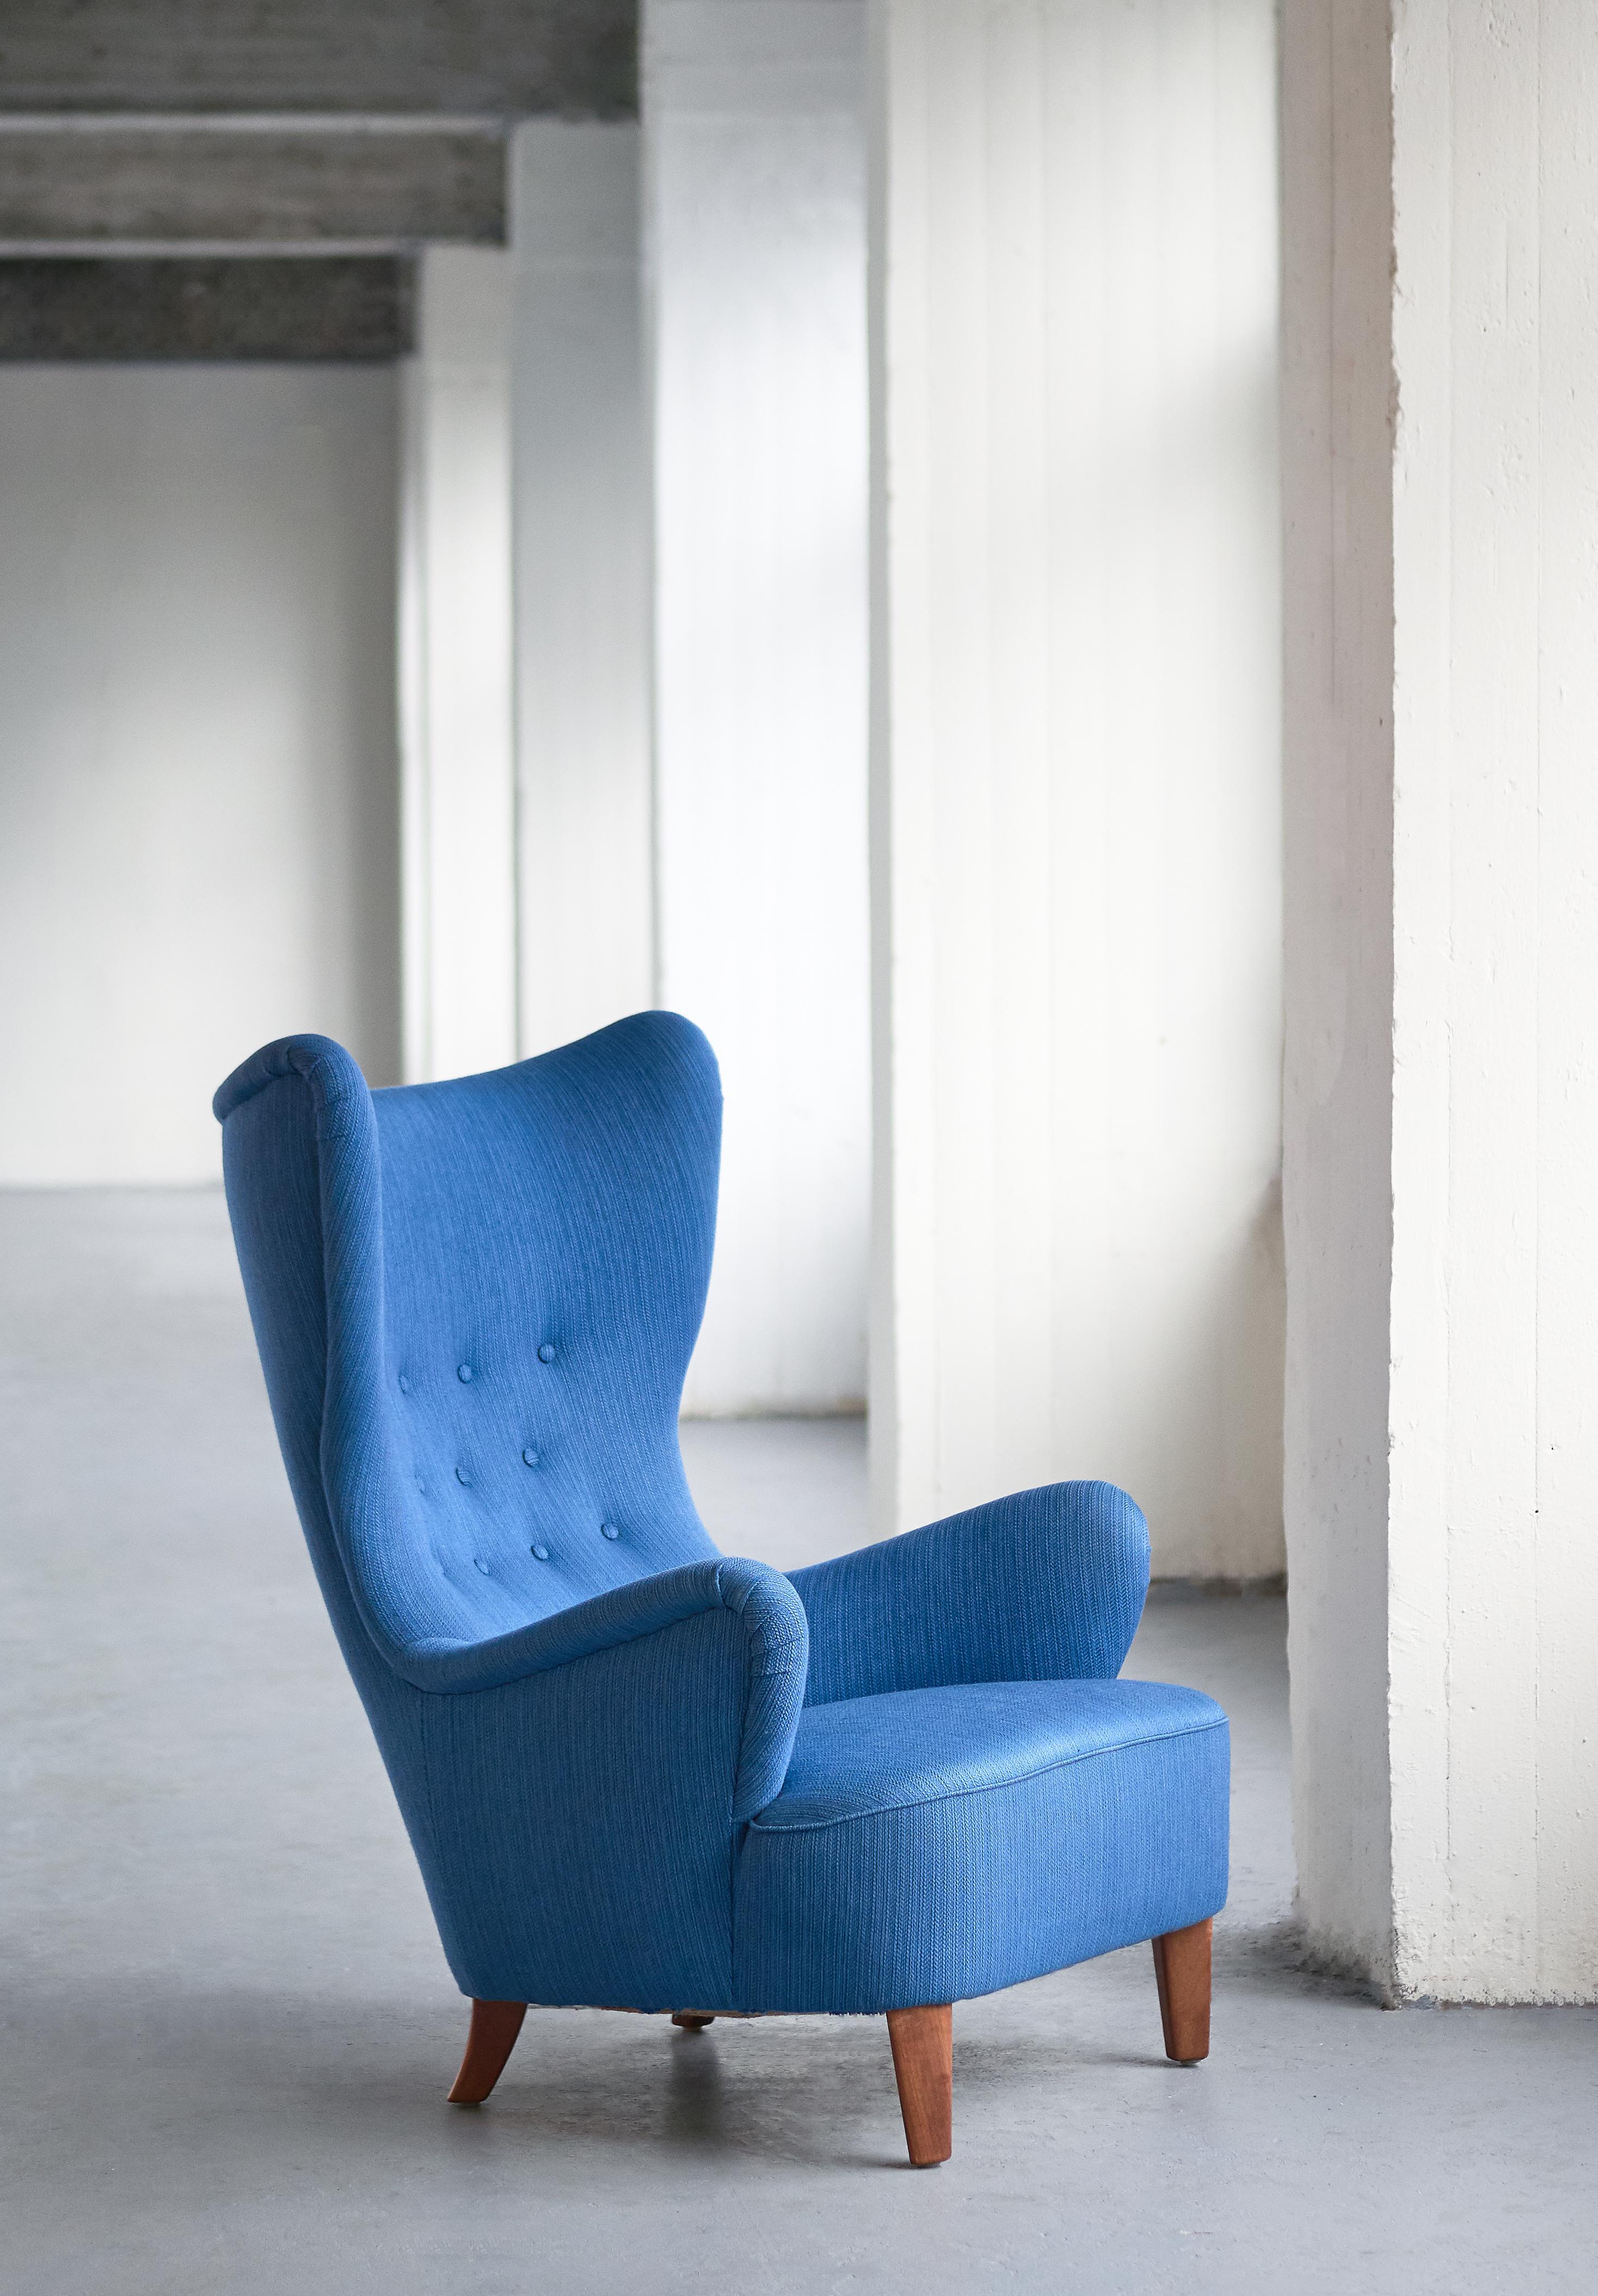 This rare wingback chair was designed by Arne Färnrot and produced in Sweden in the late 1940s. The elegant organic lines of the design create a striking silhouette. Its generous proportions and the high back make this a sumptous and very